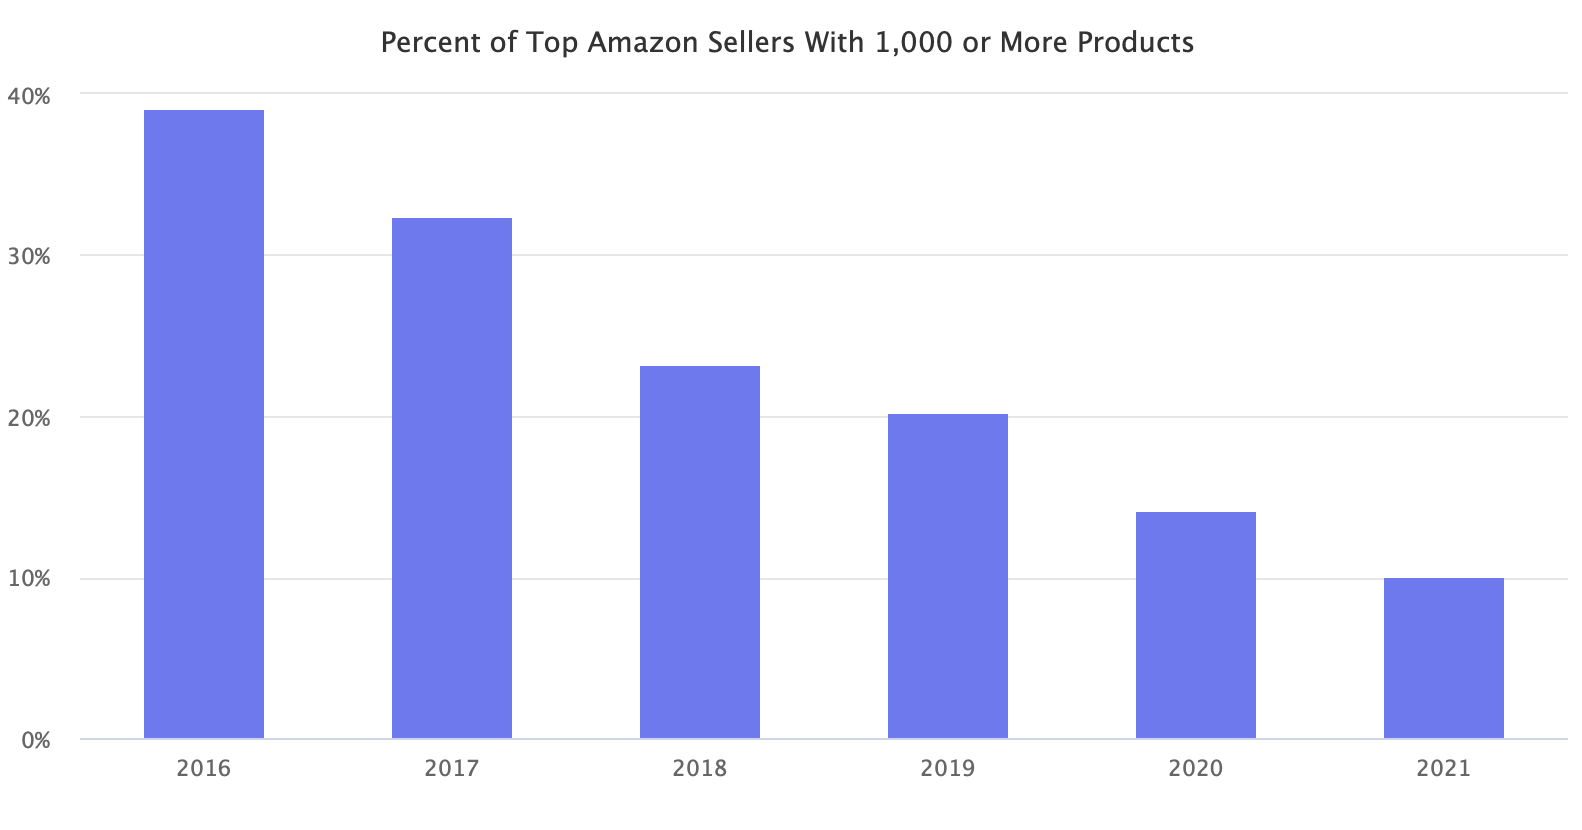 Percent of Top Amazon Sellers With 1,000 or More Products